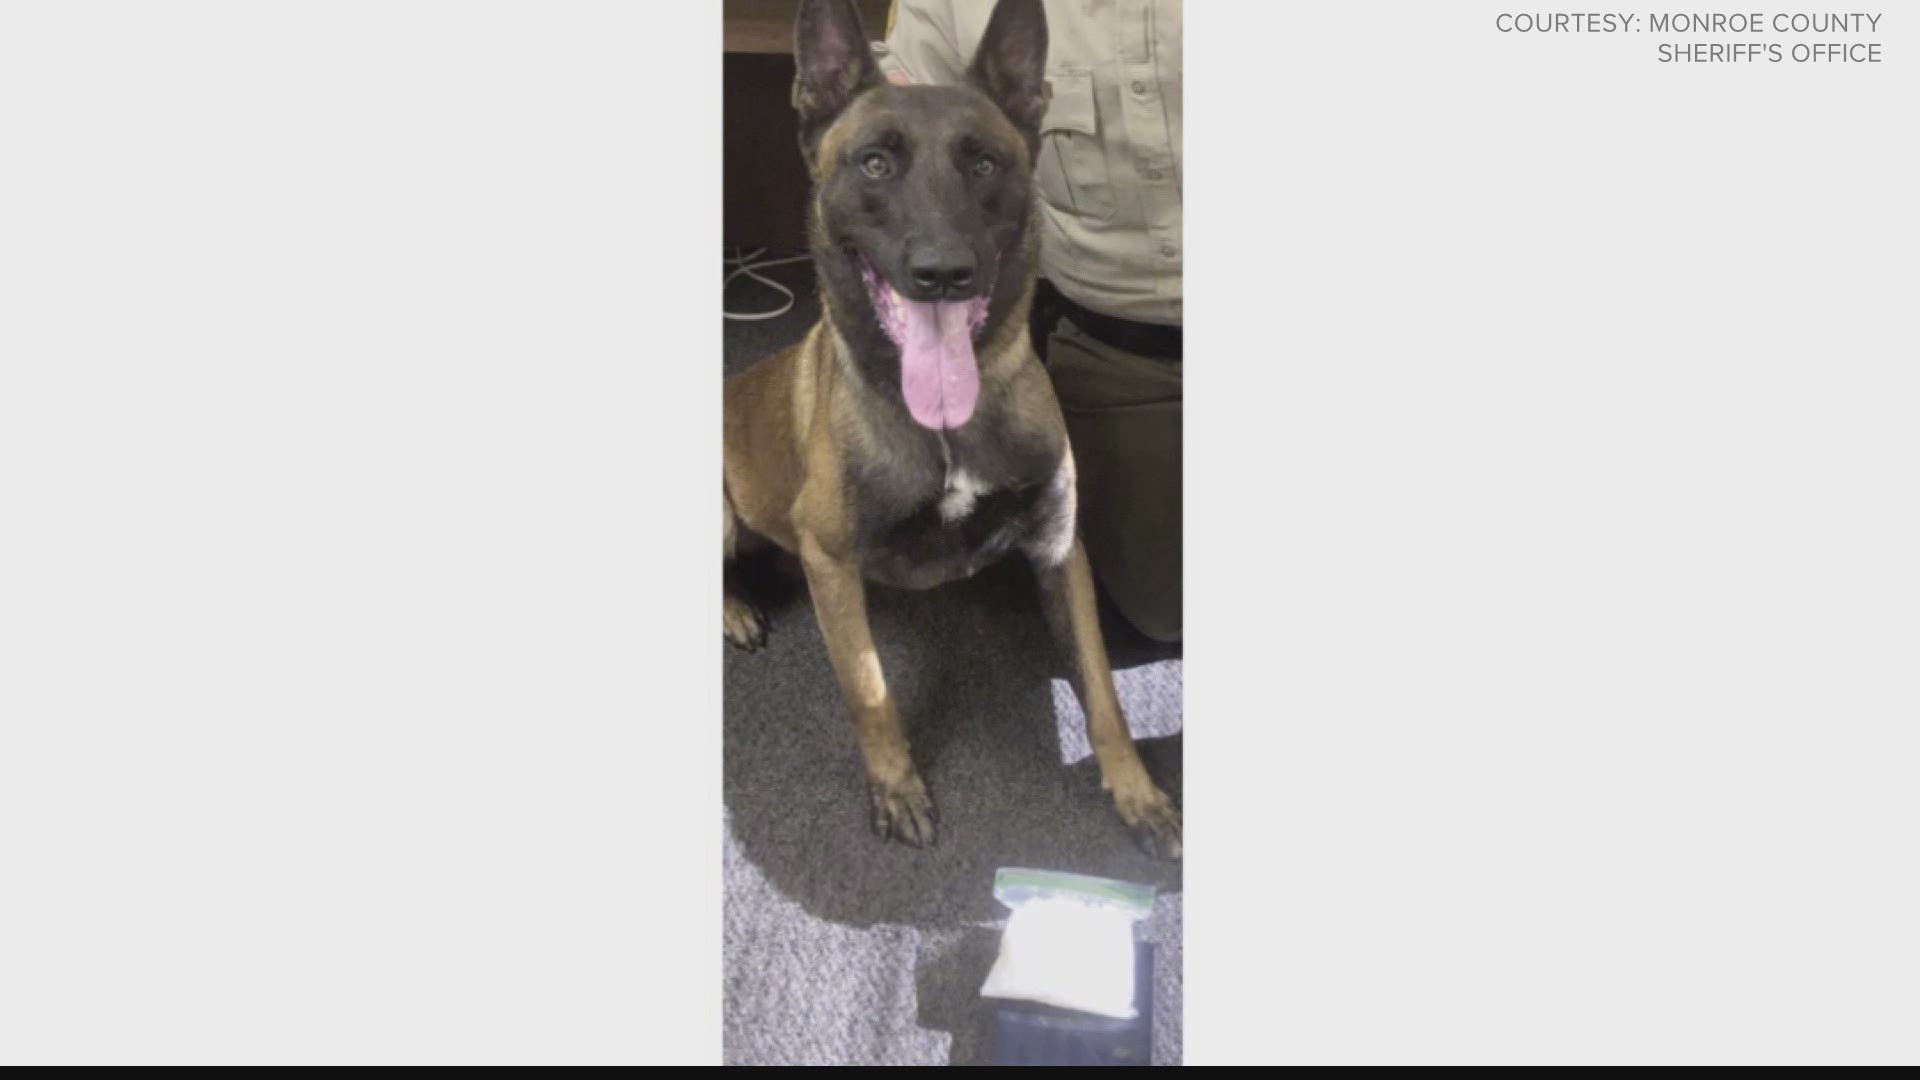 Sheriff Brad Freeman says K9 Khan's death was 'an avoidable accident.' He was four-years-old